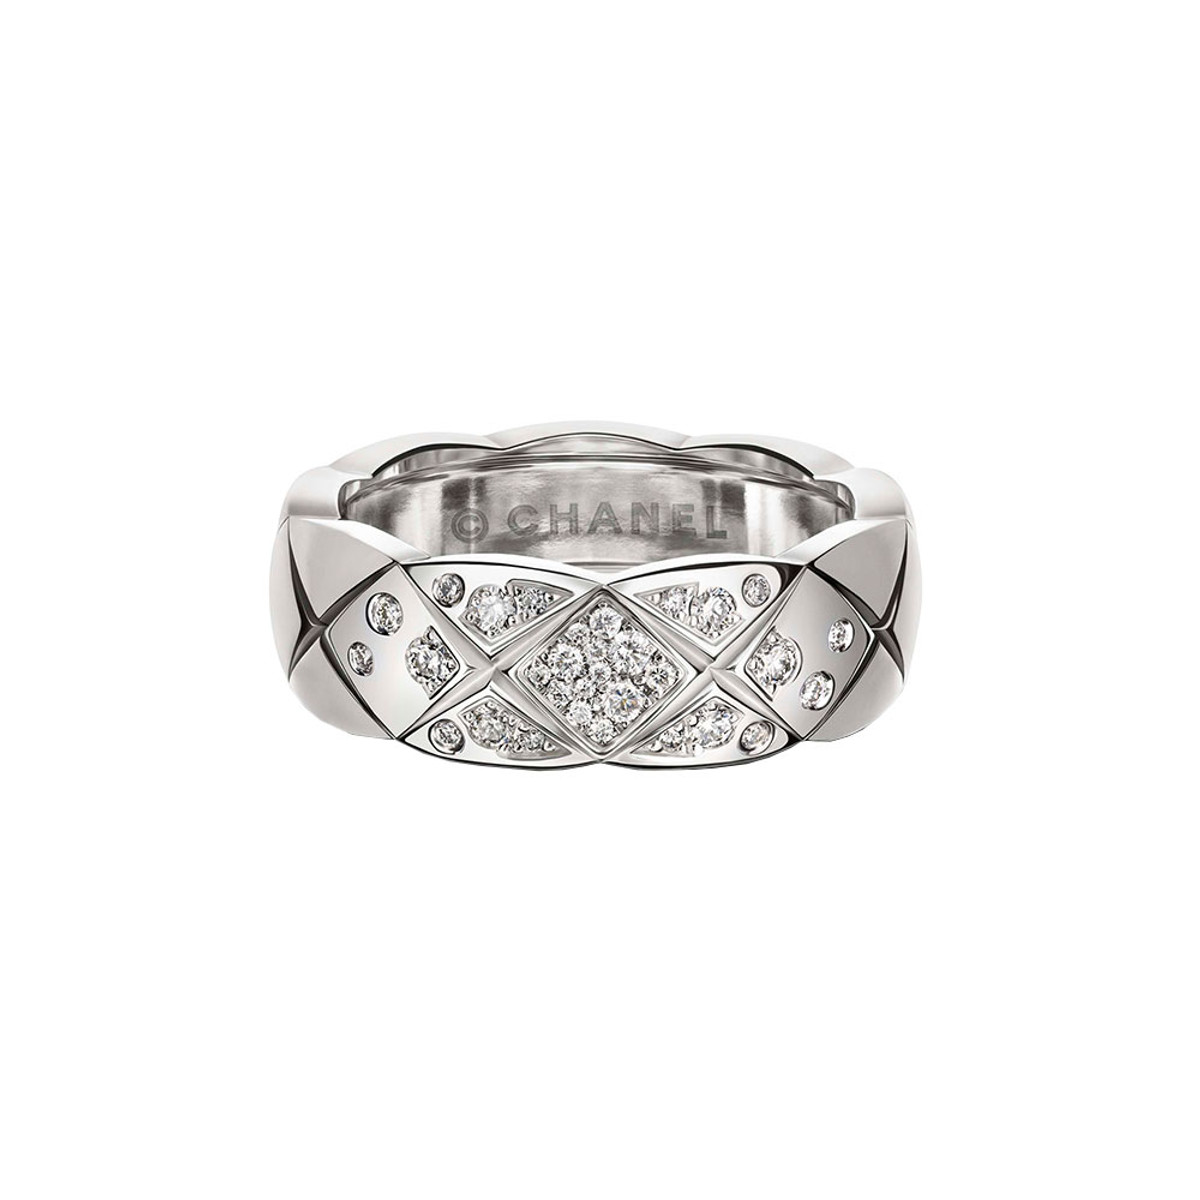 CHANEL COCO CRUSH RING-25958 Product Image